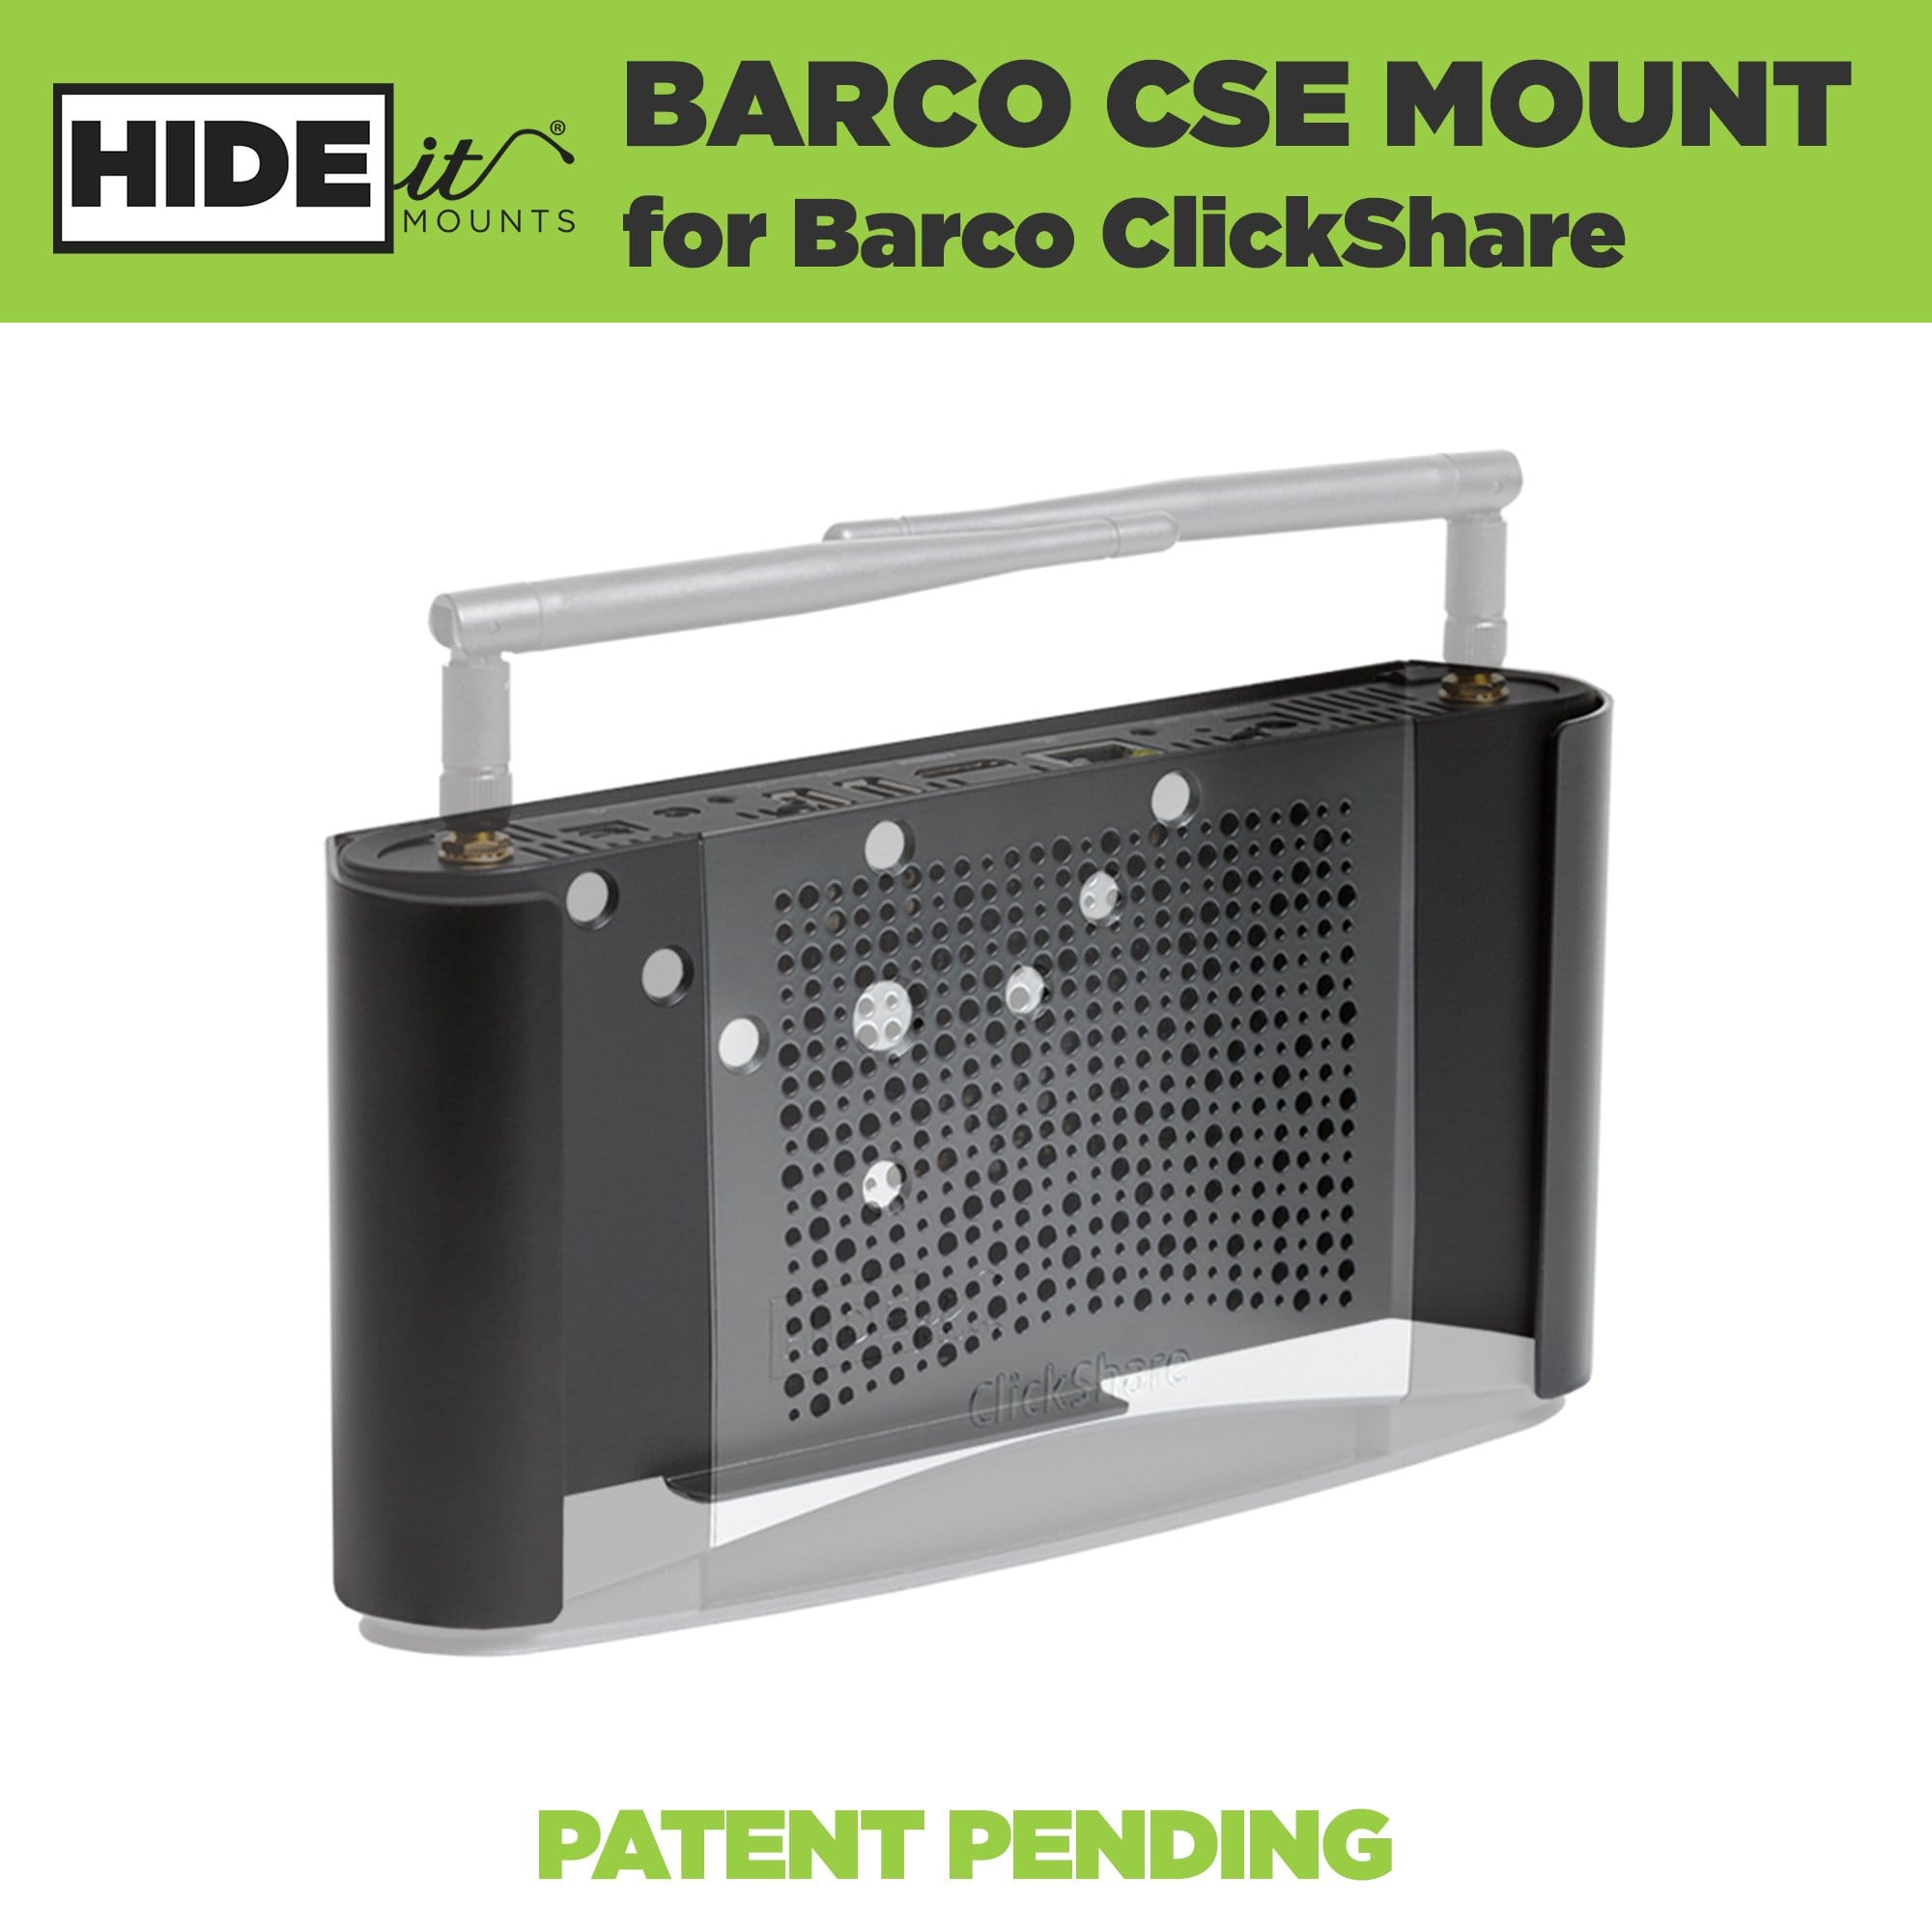 Empty black Barco mount made by HIDEit Mounts designed for wall, under-desk, and VESA mounting.